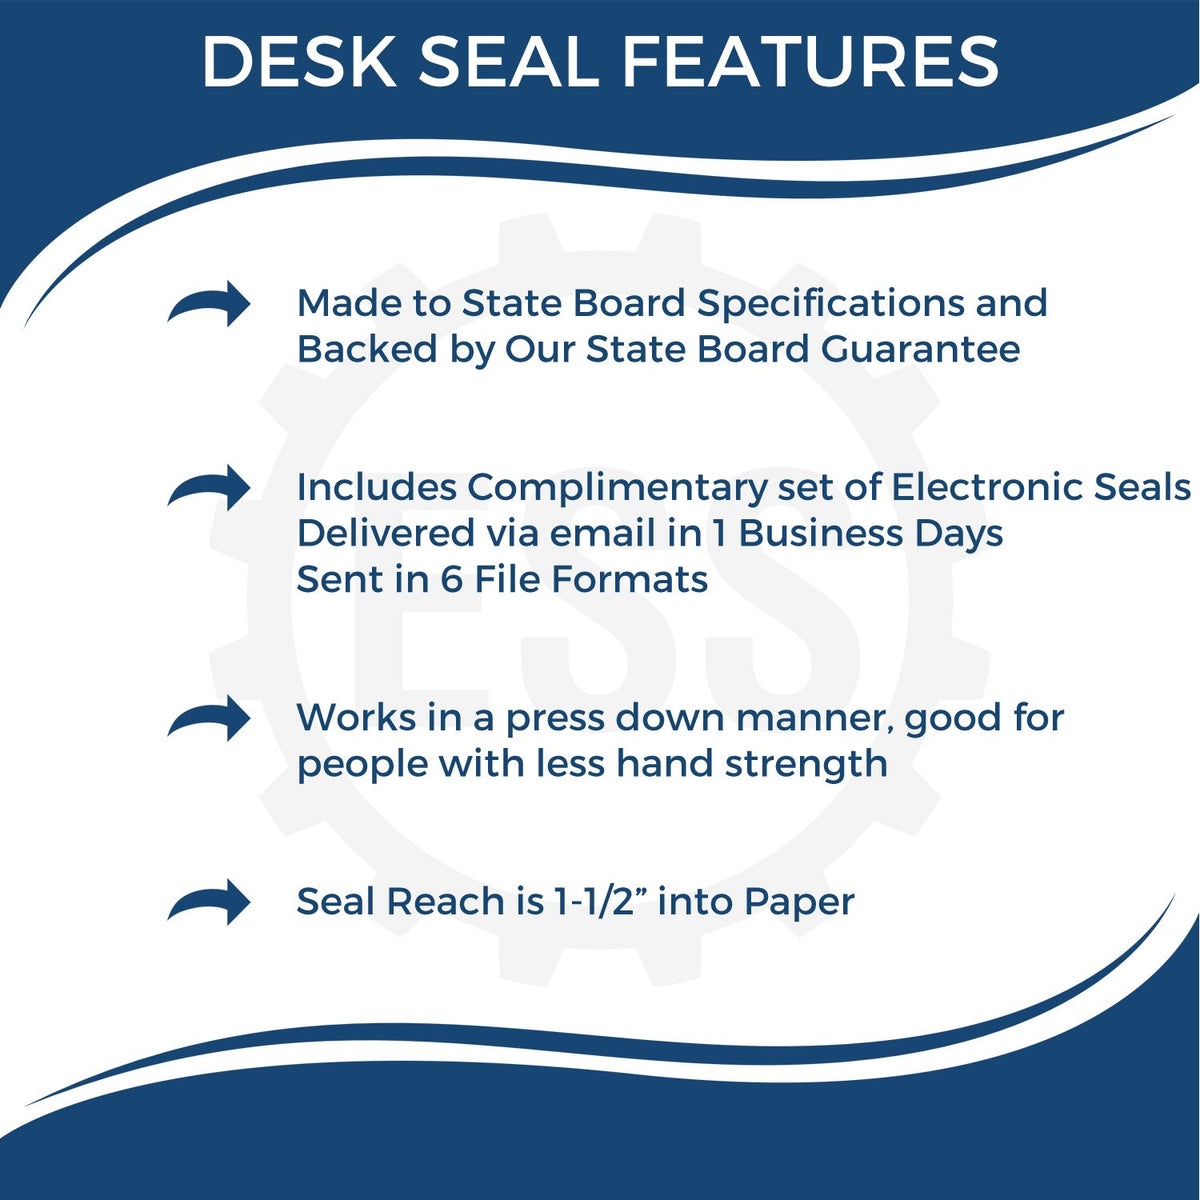 A picture of an infographic highlighting the selling points for the Kentucky Desk Surveyor Seal Embosser